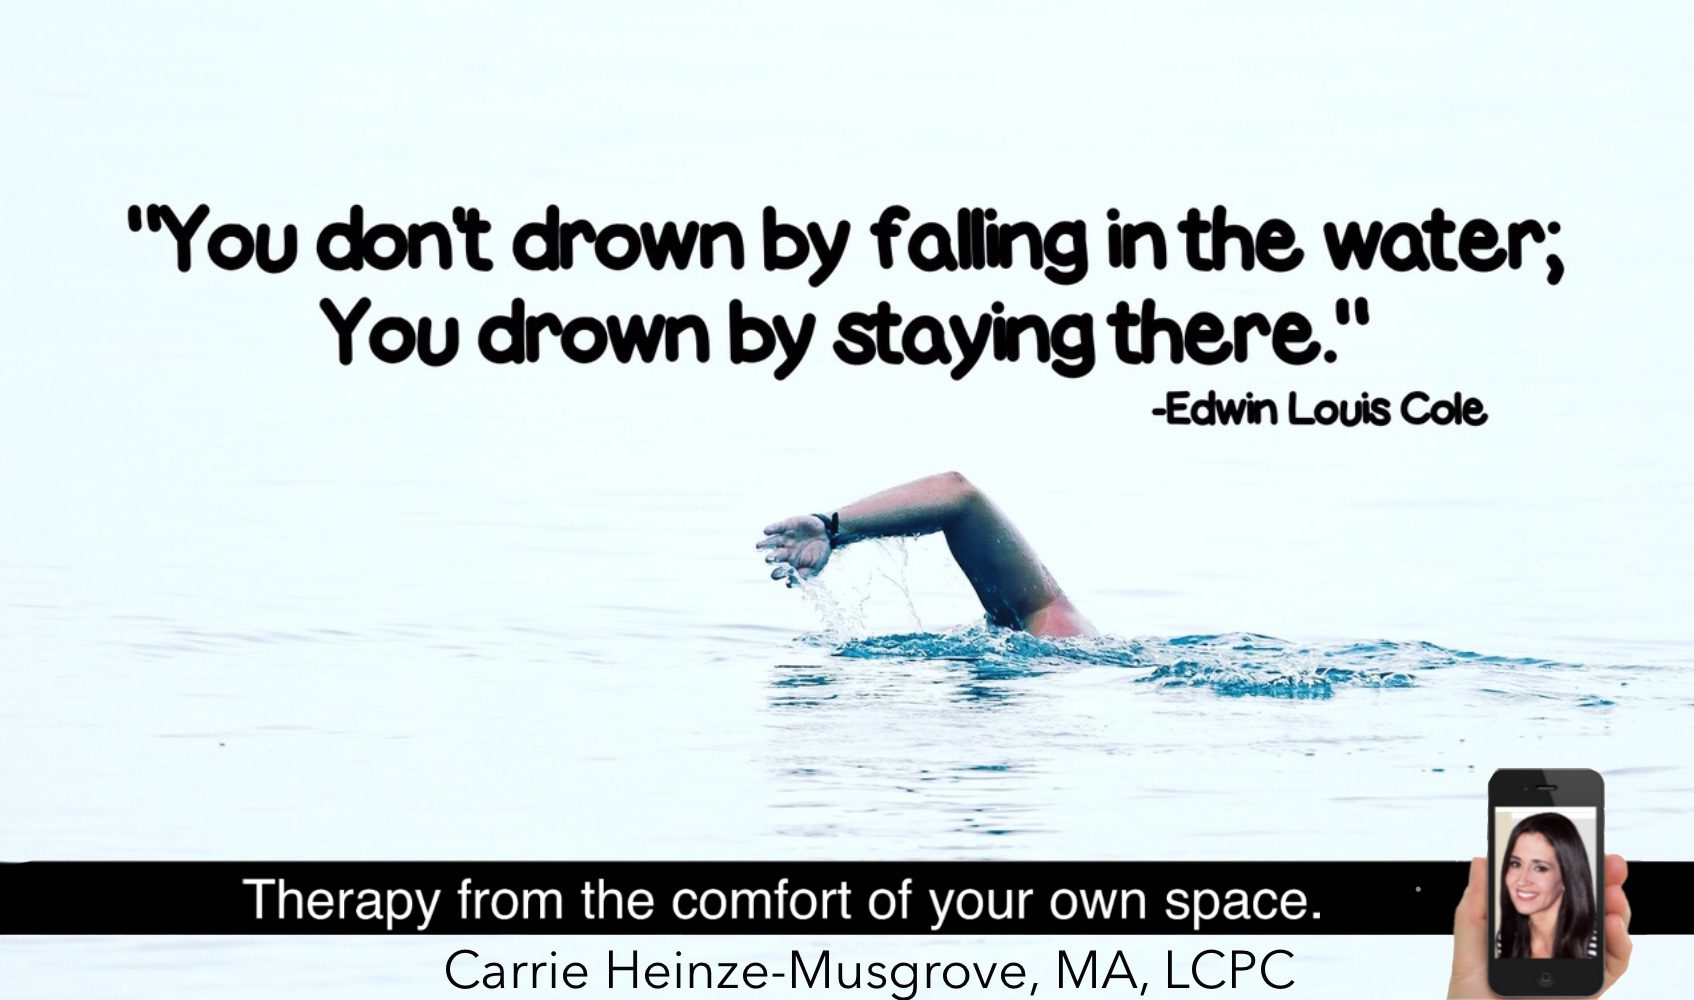 You don’t drown by falling in the water. You drown by staying there.